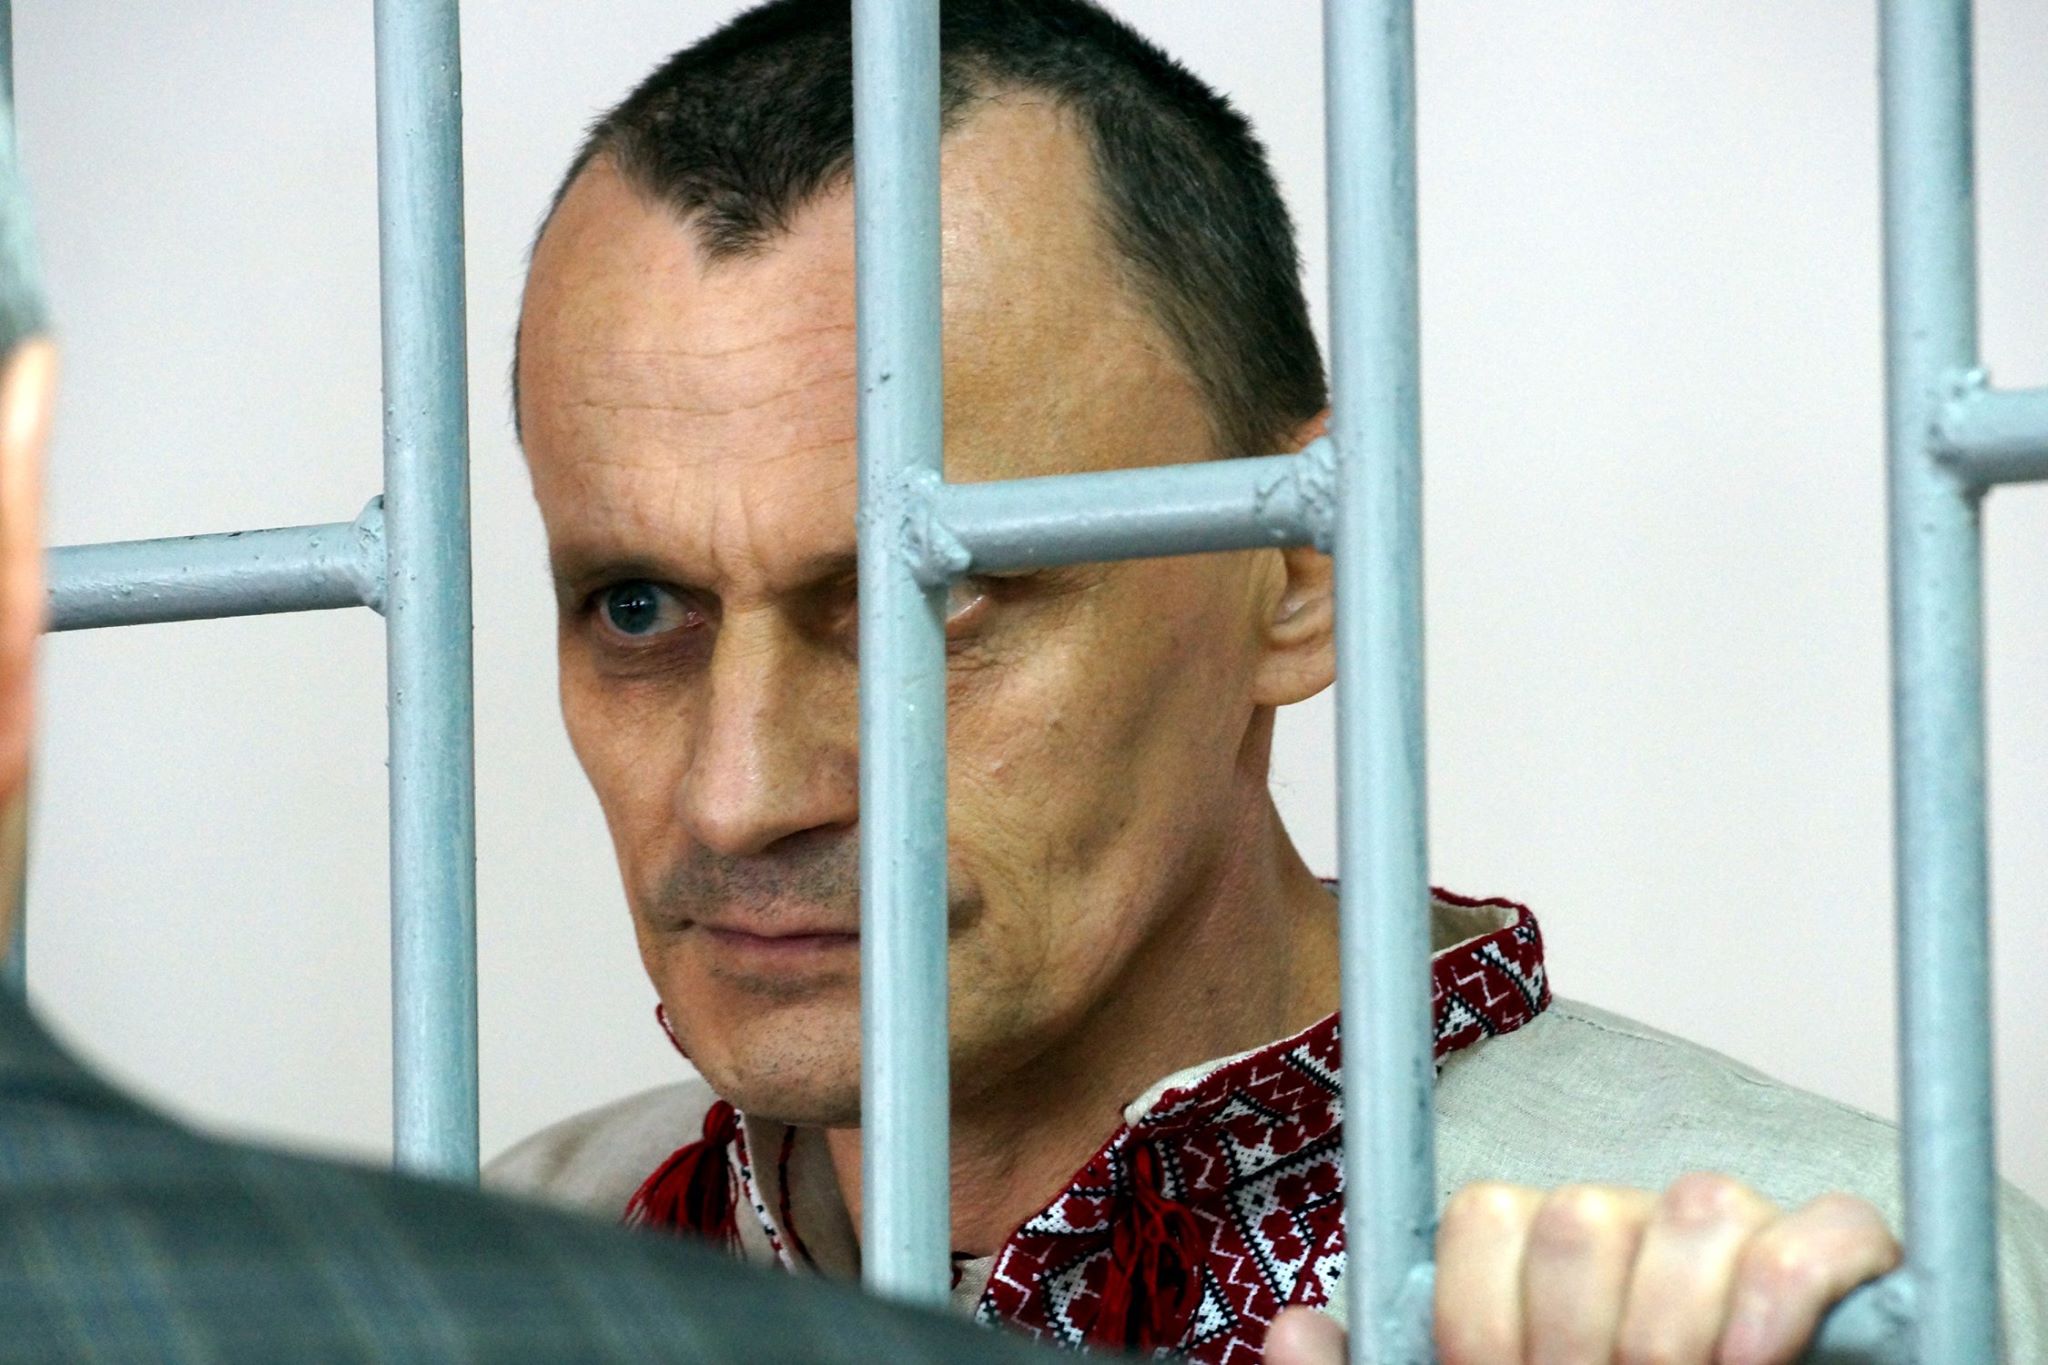 Lawyer: Karpyuk was tortured the most. They needed a case against a real banderite